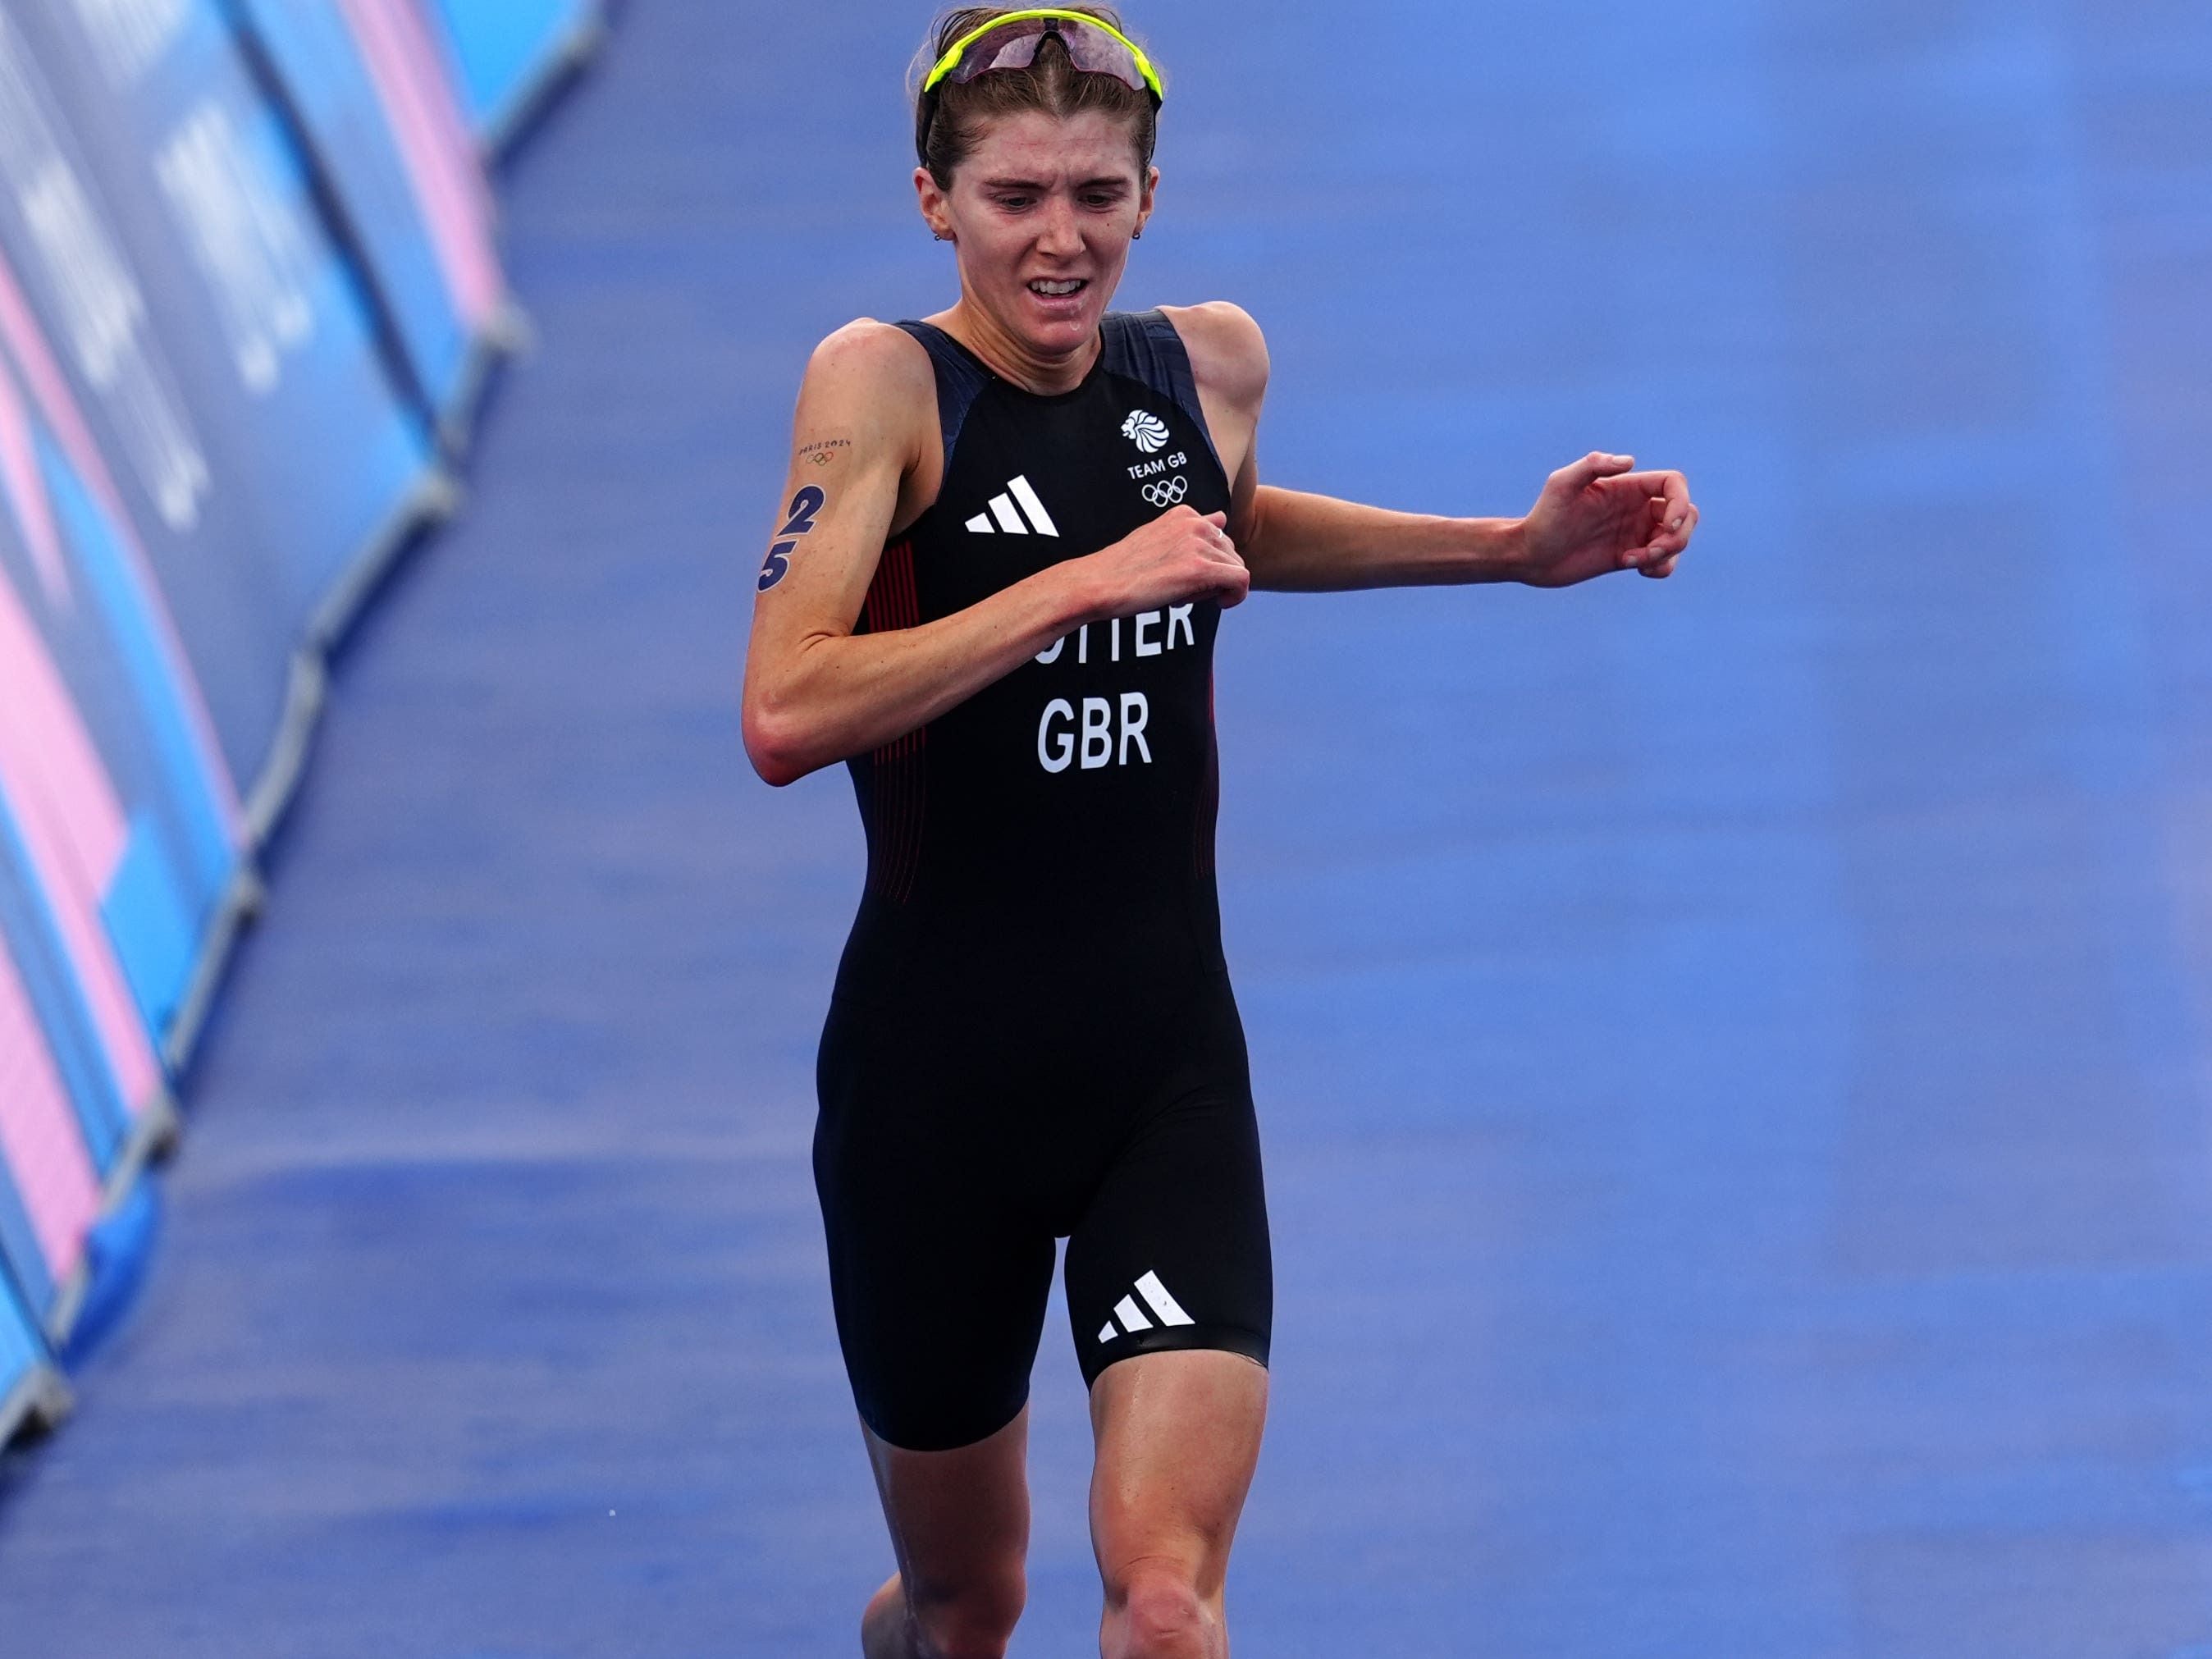 Beth Potter relieved to have toughed it out for a triathlon bronze medal